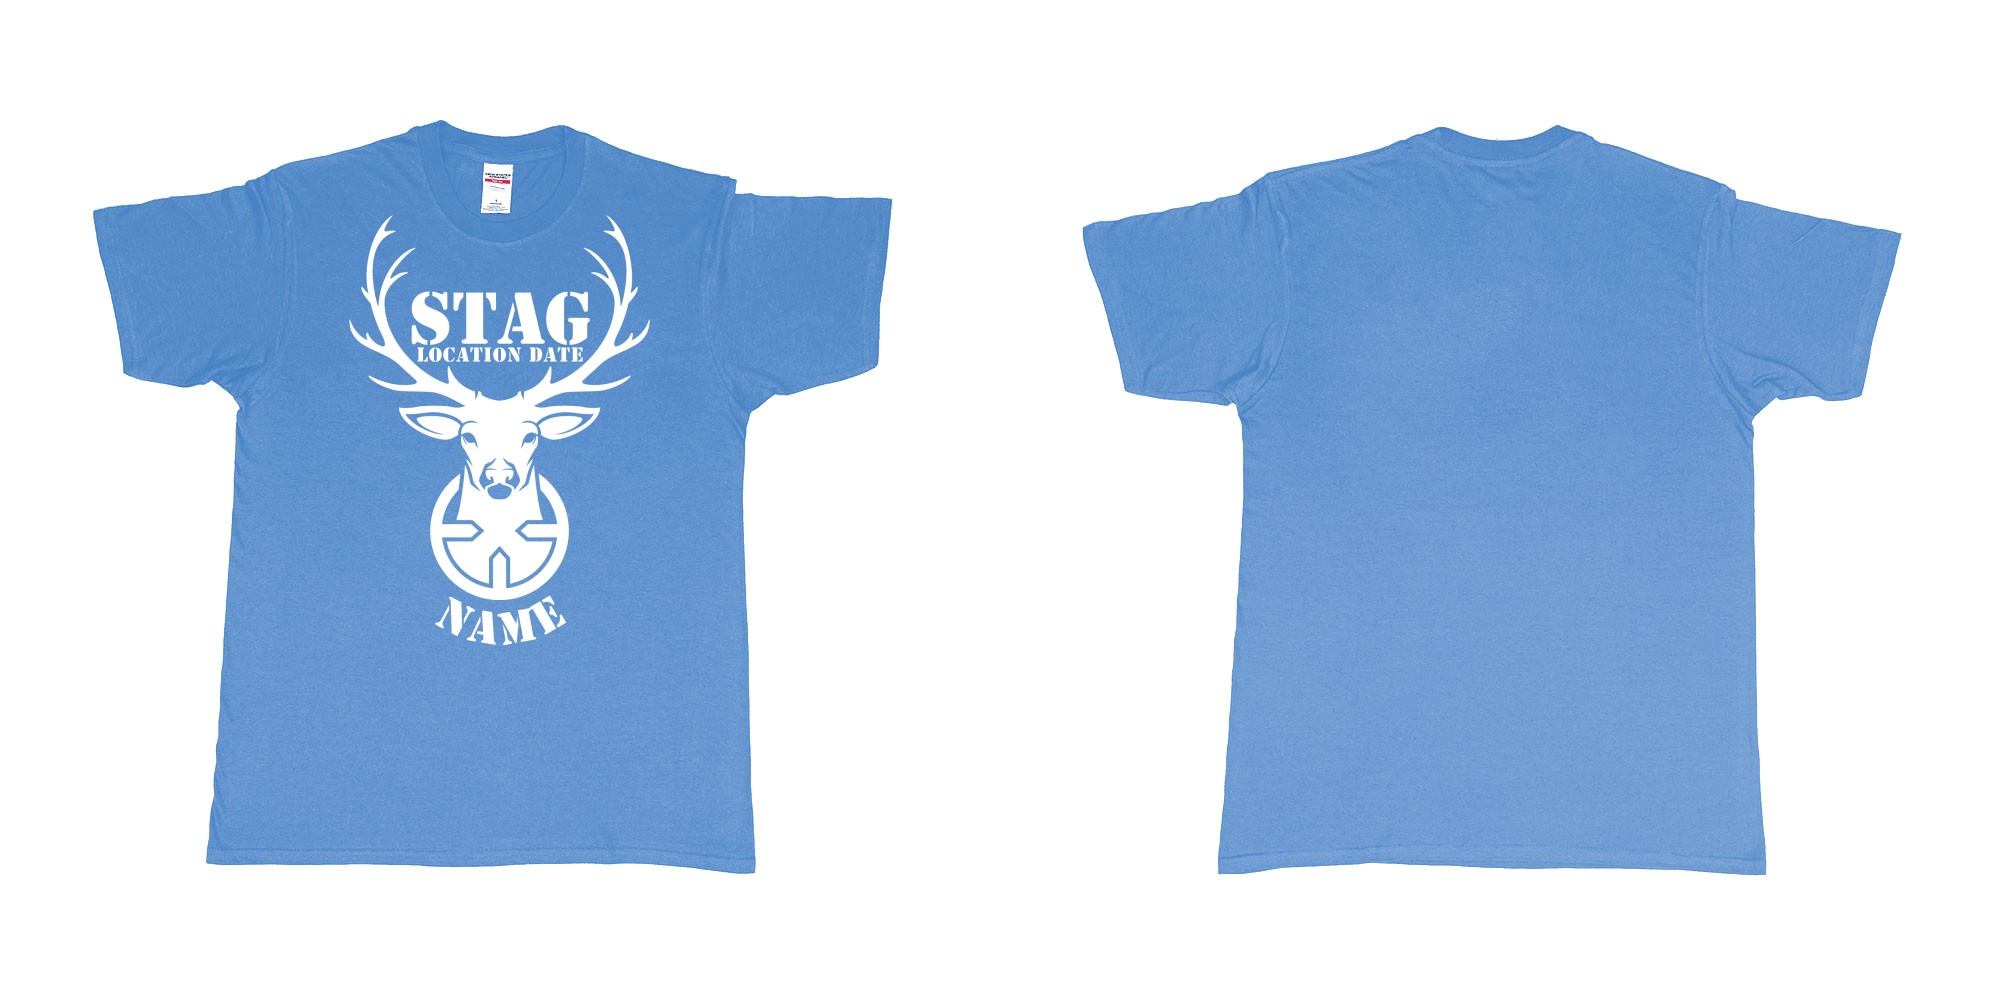 Custom tshirt design aiming for a stag custom tshirt print in fabric color carolina-blue choice your own text made in Bali by The Pirate Way